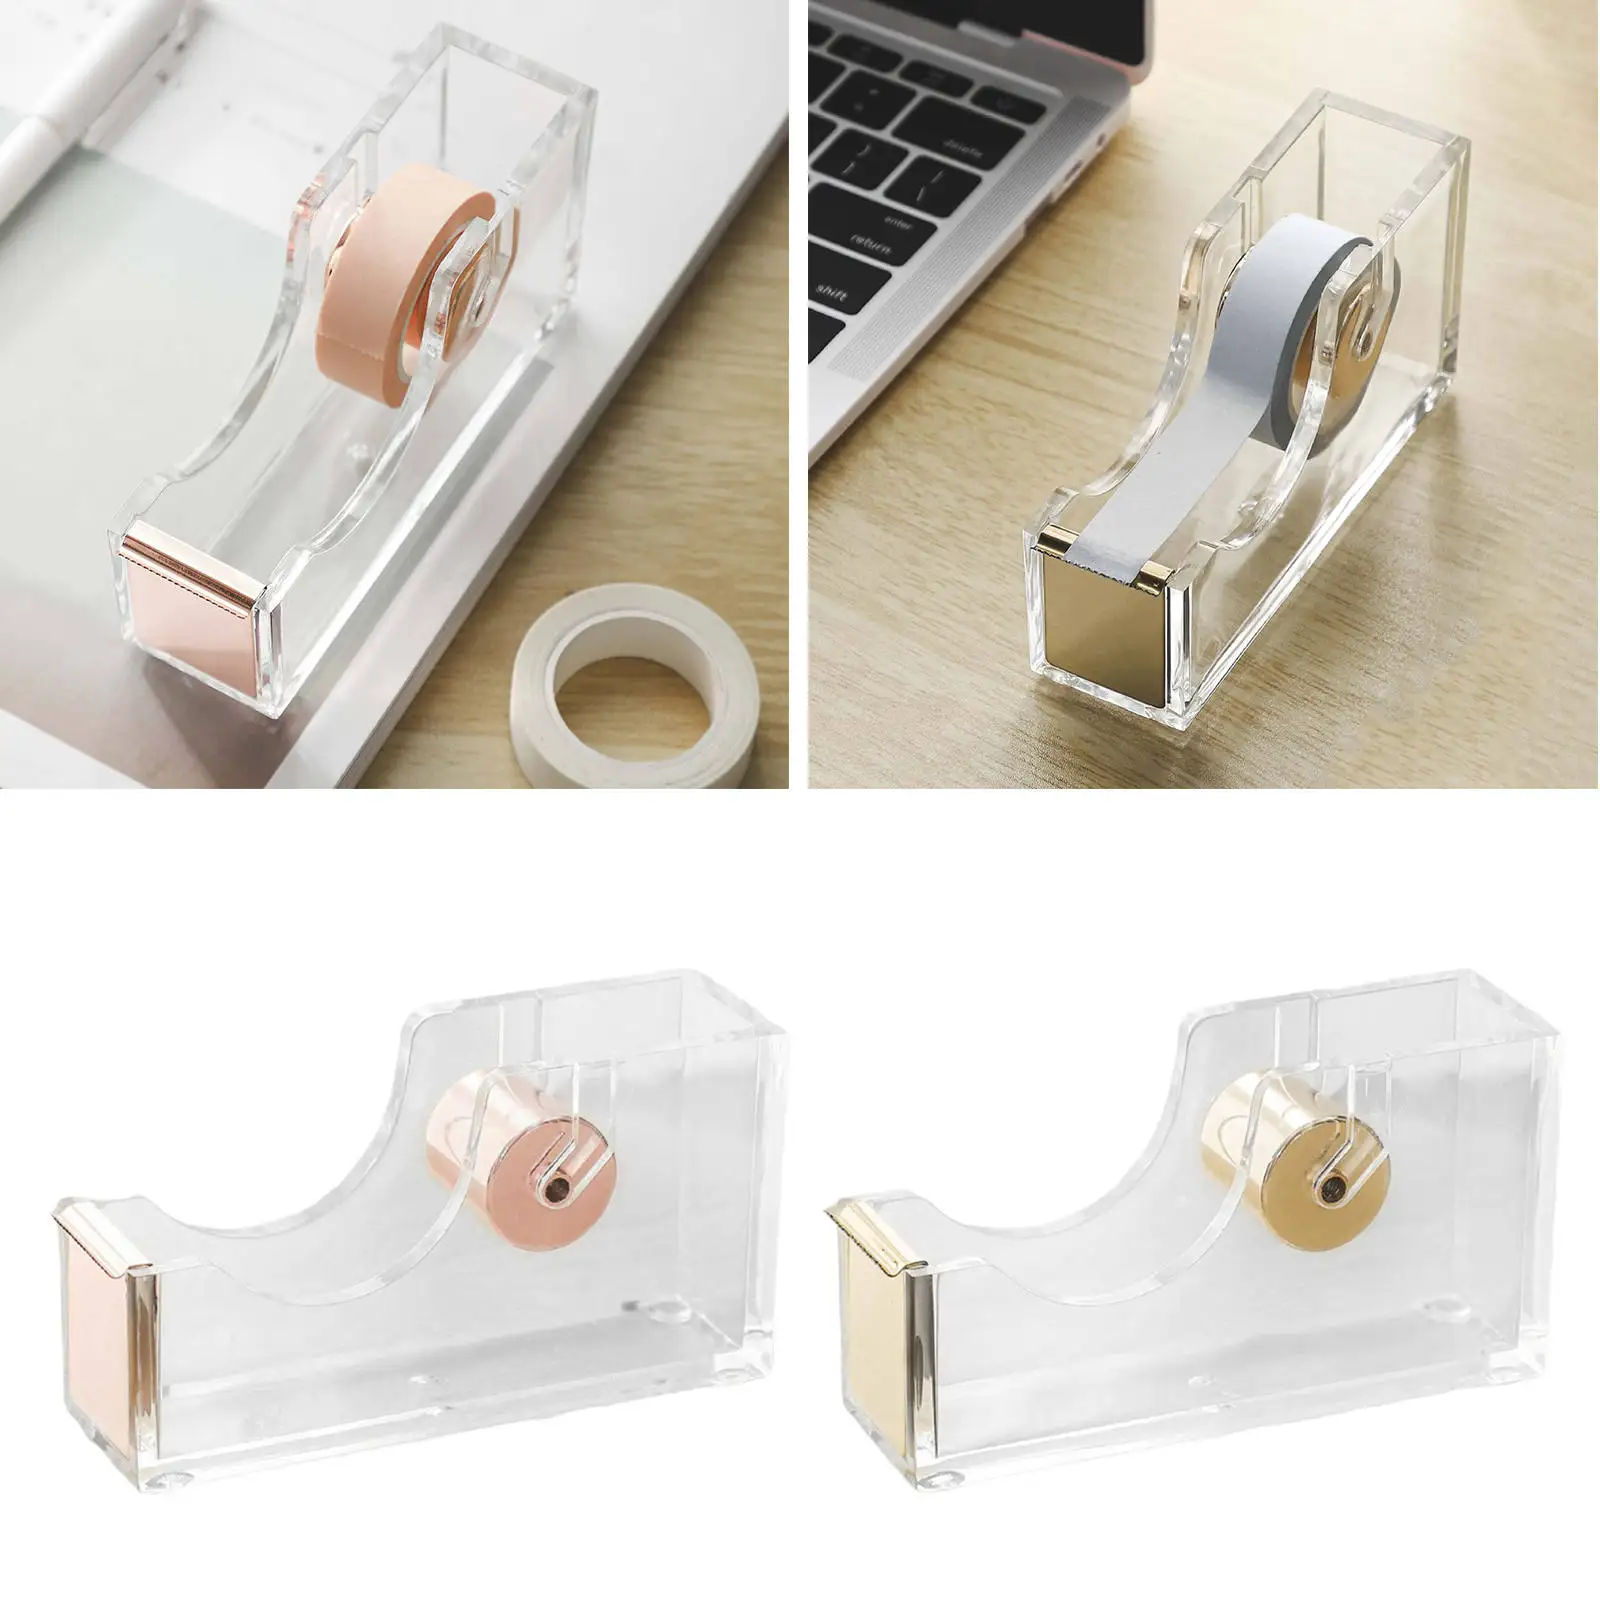 1Pcs Tape Dispenser Acrylic Clear Accessory Portable Available Organization Elegant Stationery for Home School Desktop Office